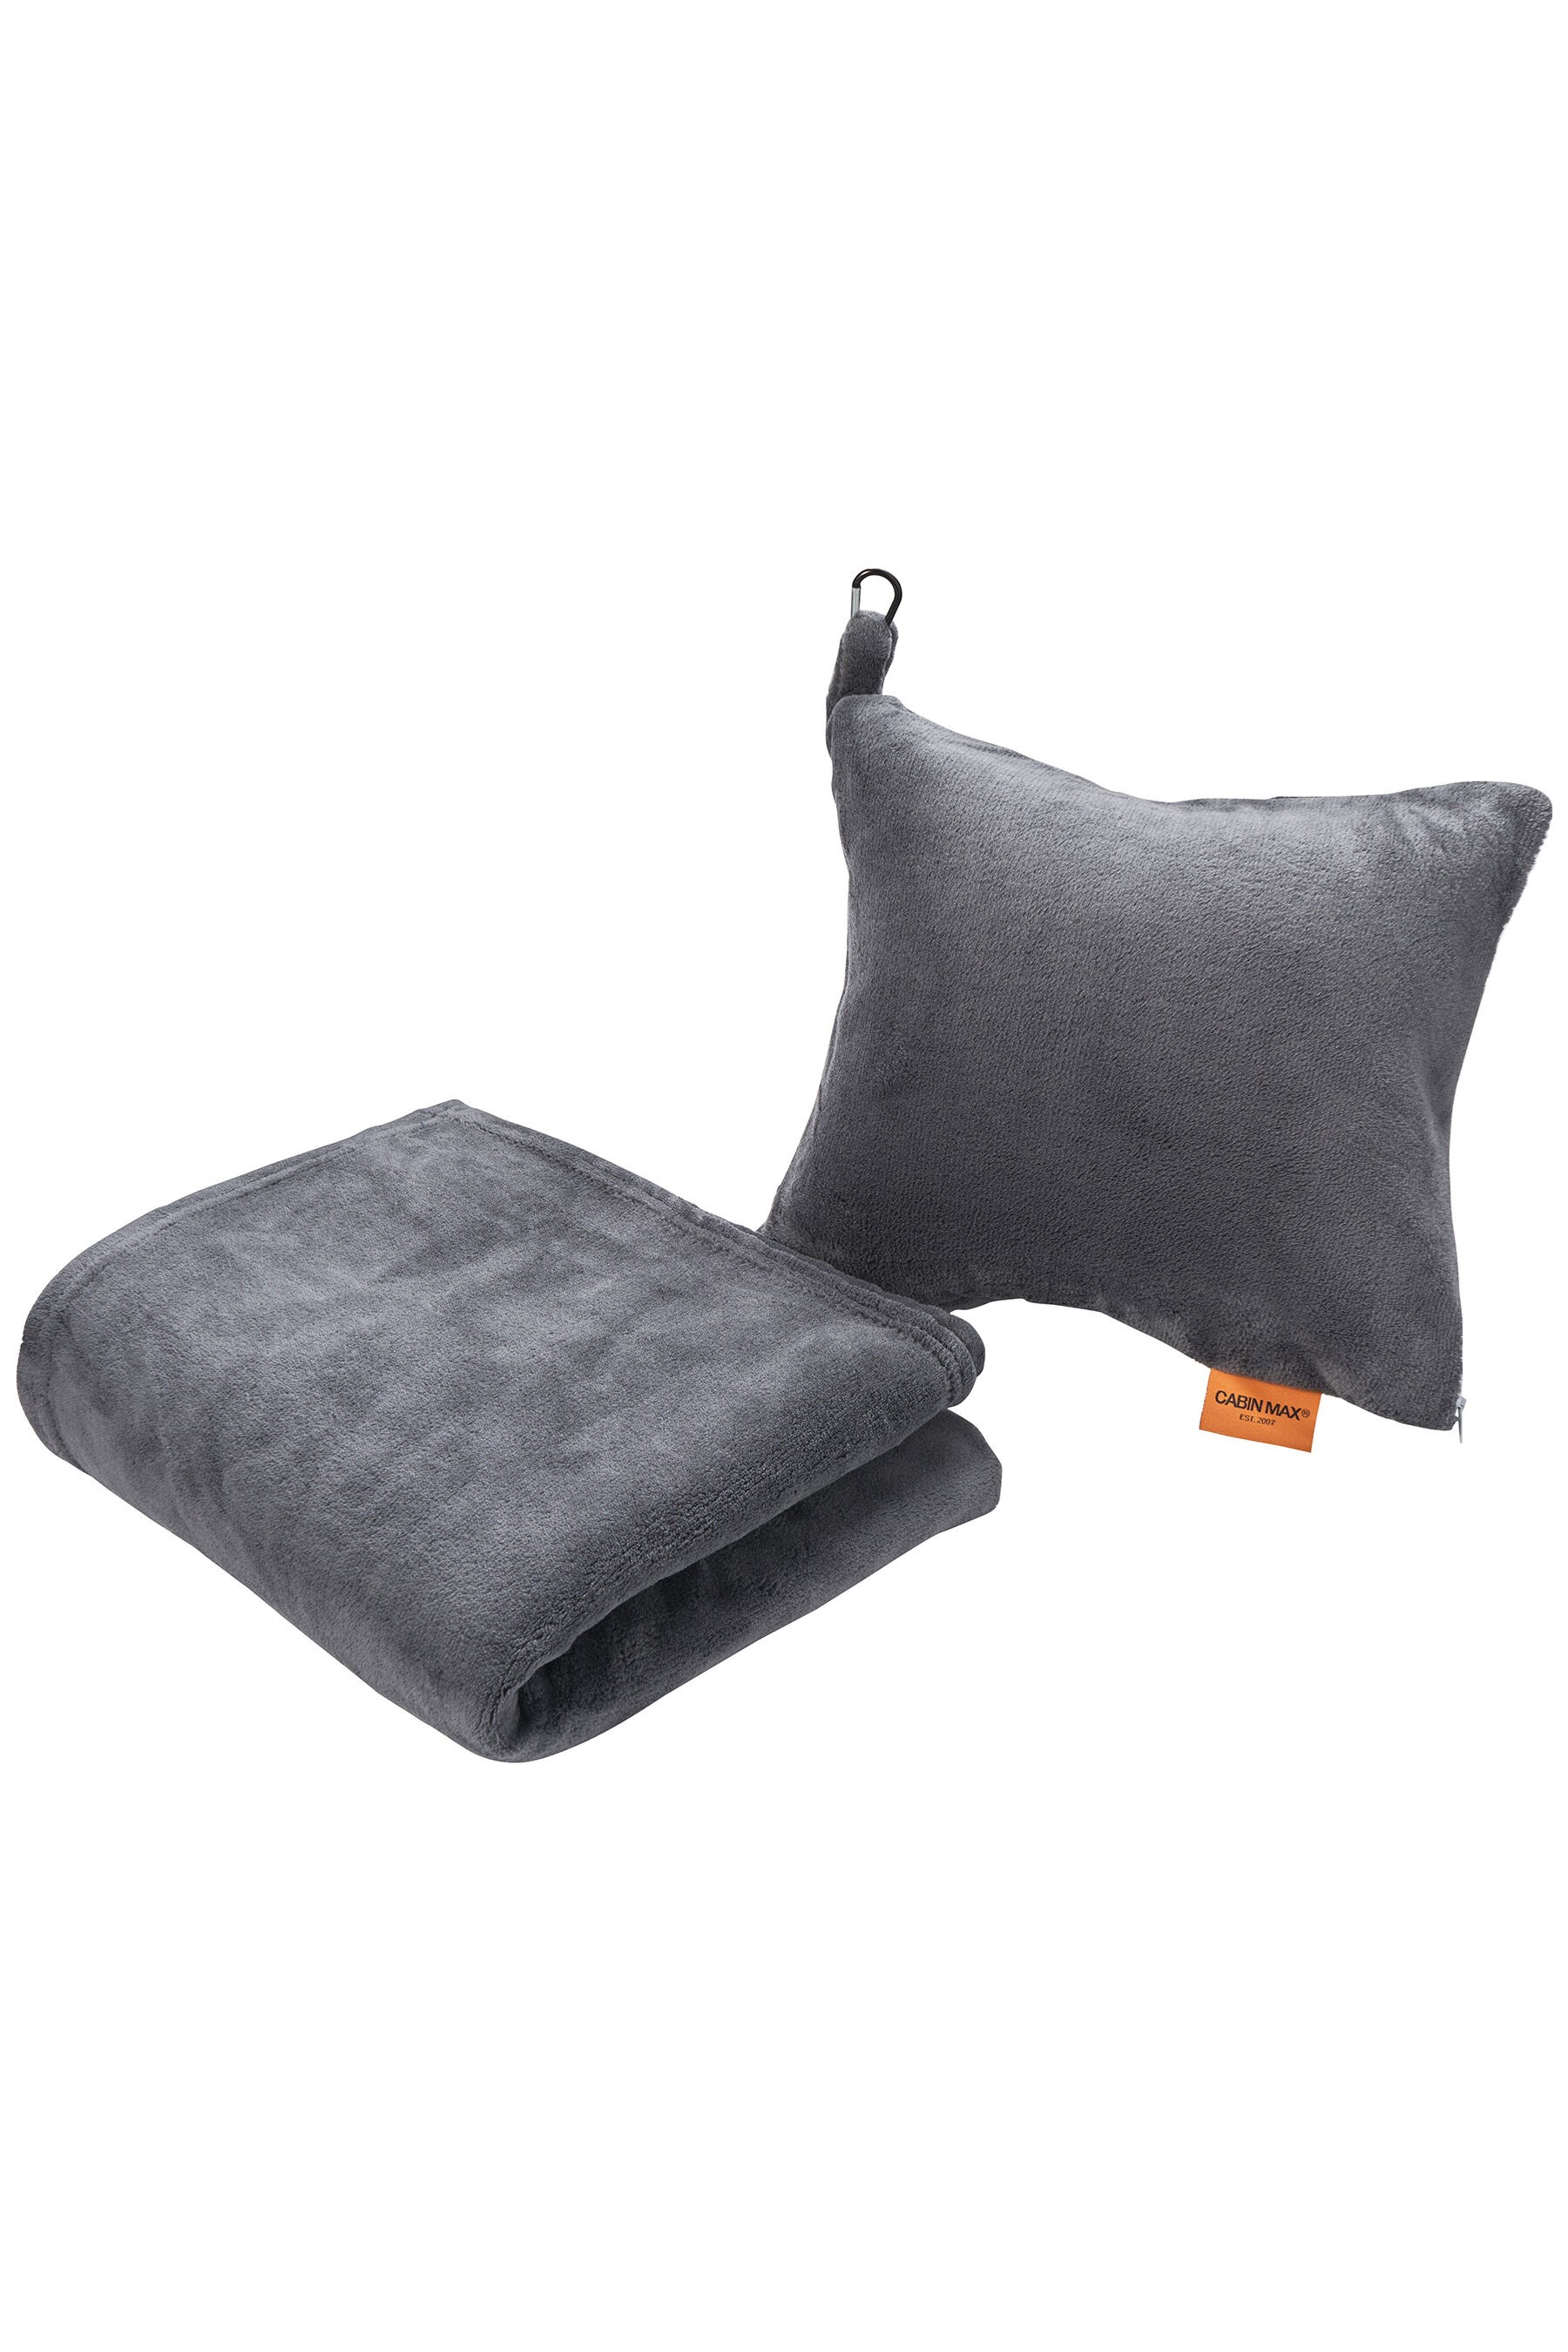 2 in 1 Travel Blanket and Inflatable Pillow Set -